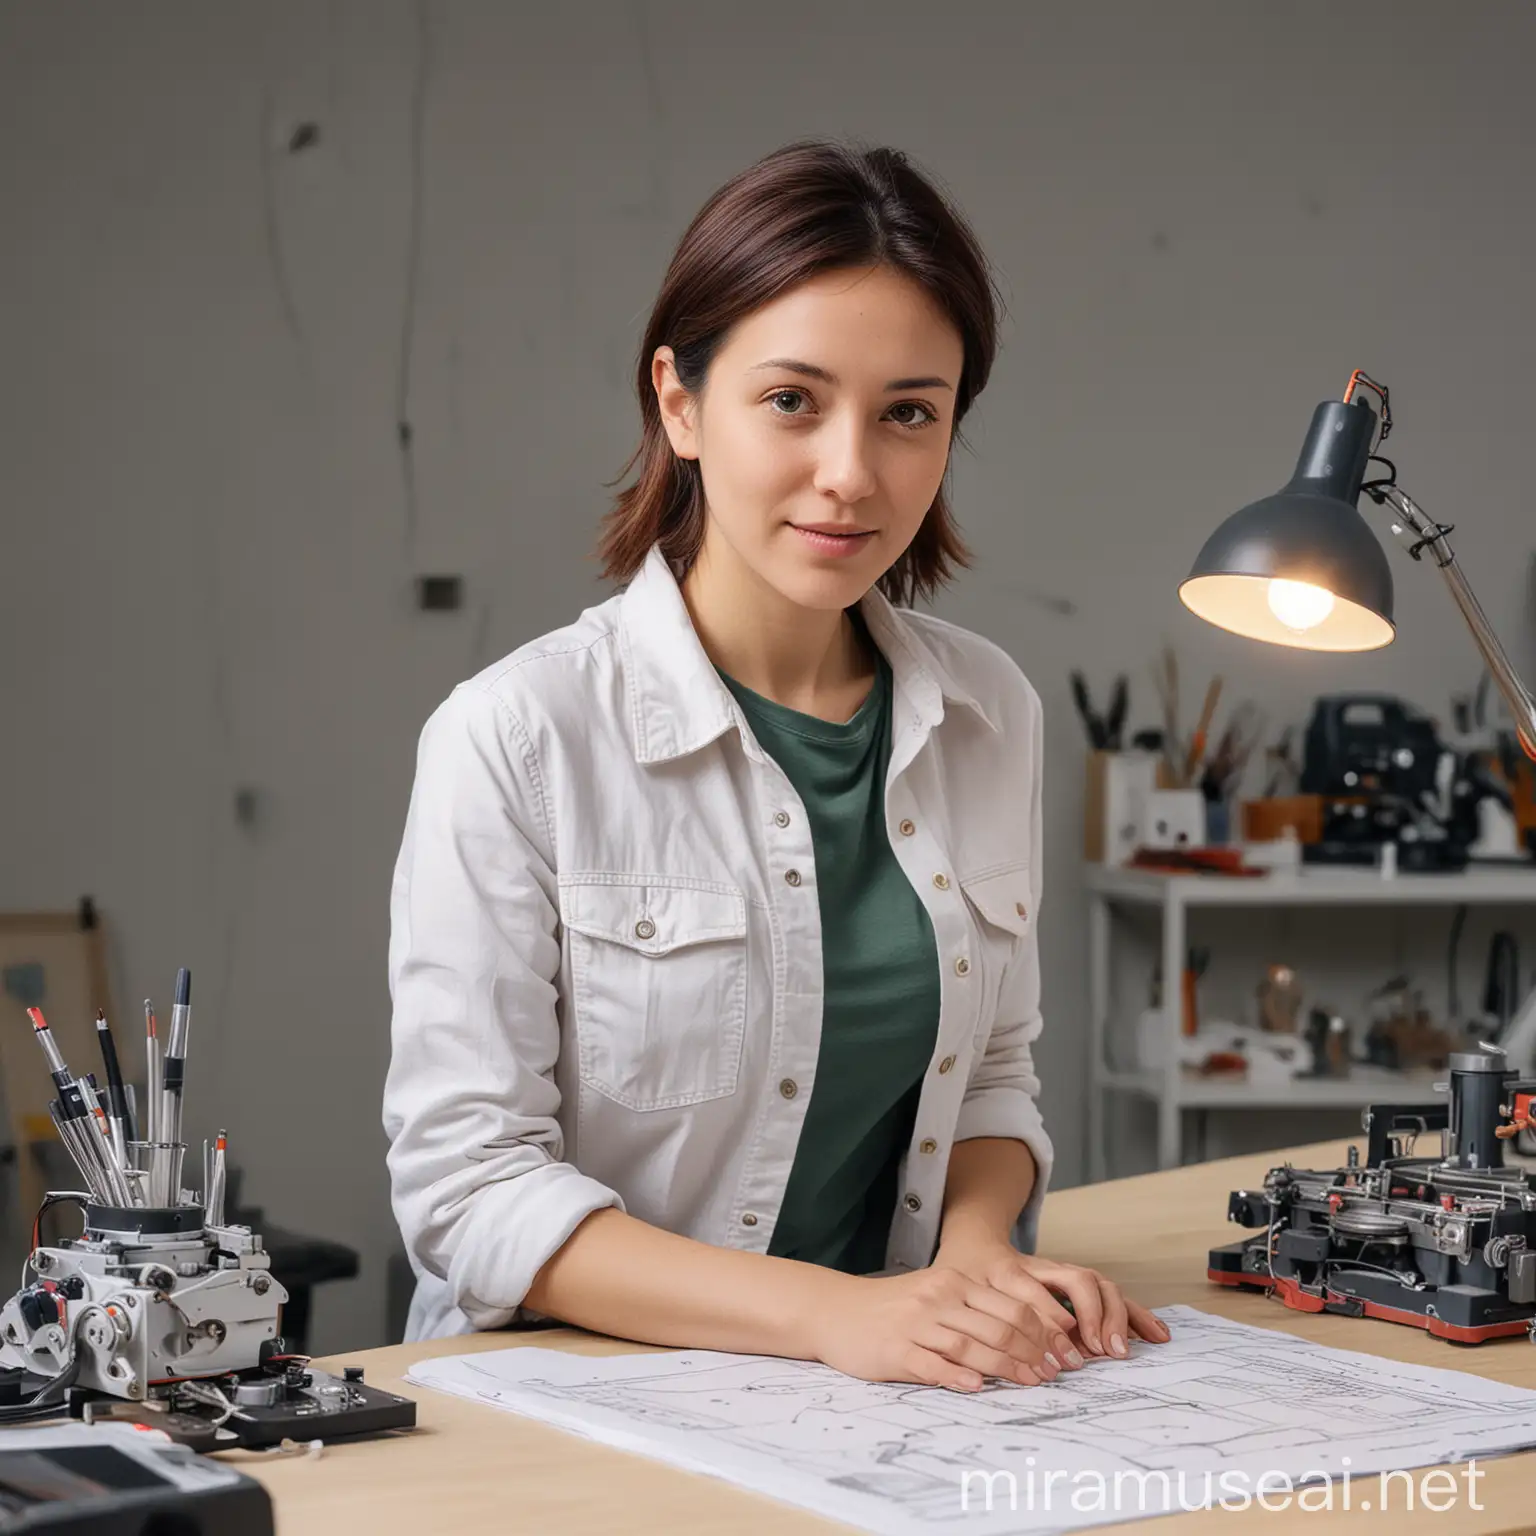 Young Woman Studying Industrial Design in Laboratory